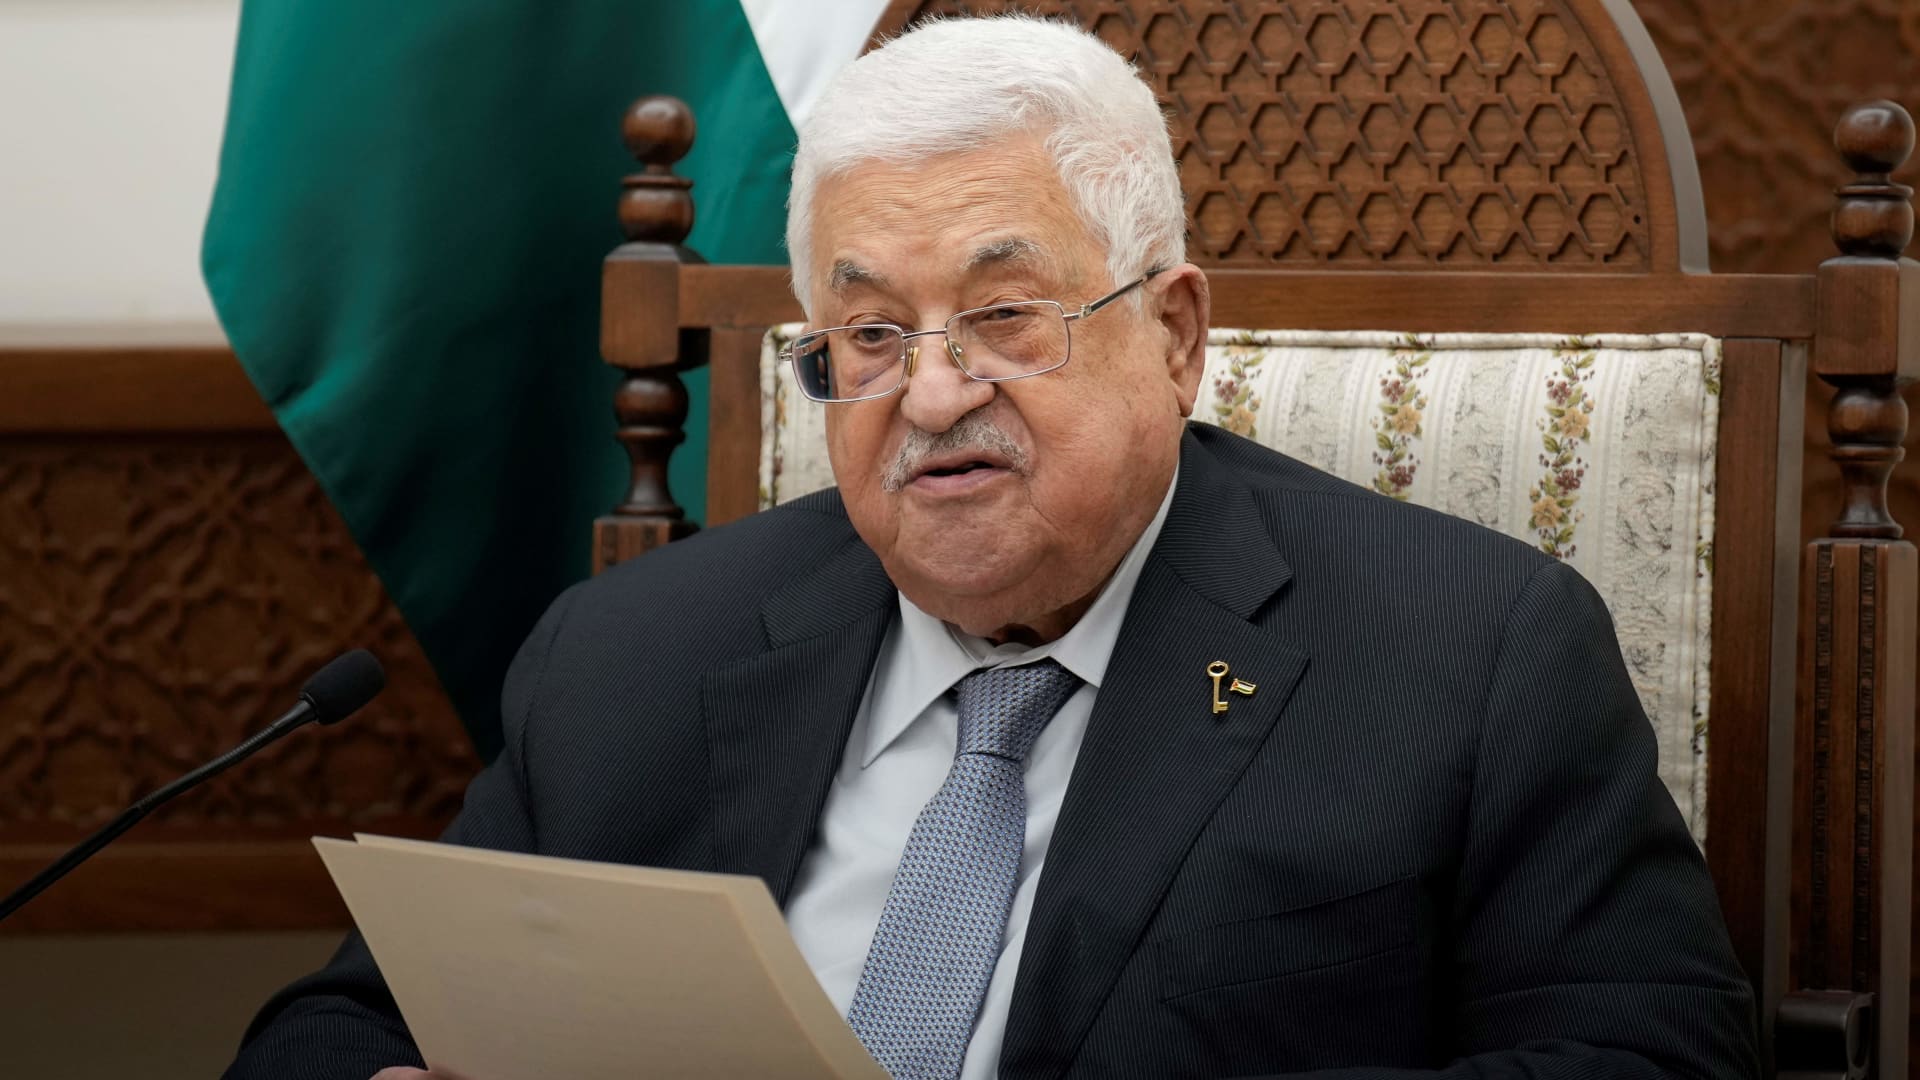 Palestinian President Mahmoud Abbas has called on the international community to stop Israel's aggression and bombardments in the Gaza Strip.